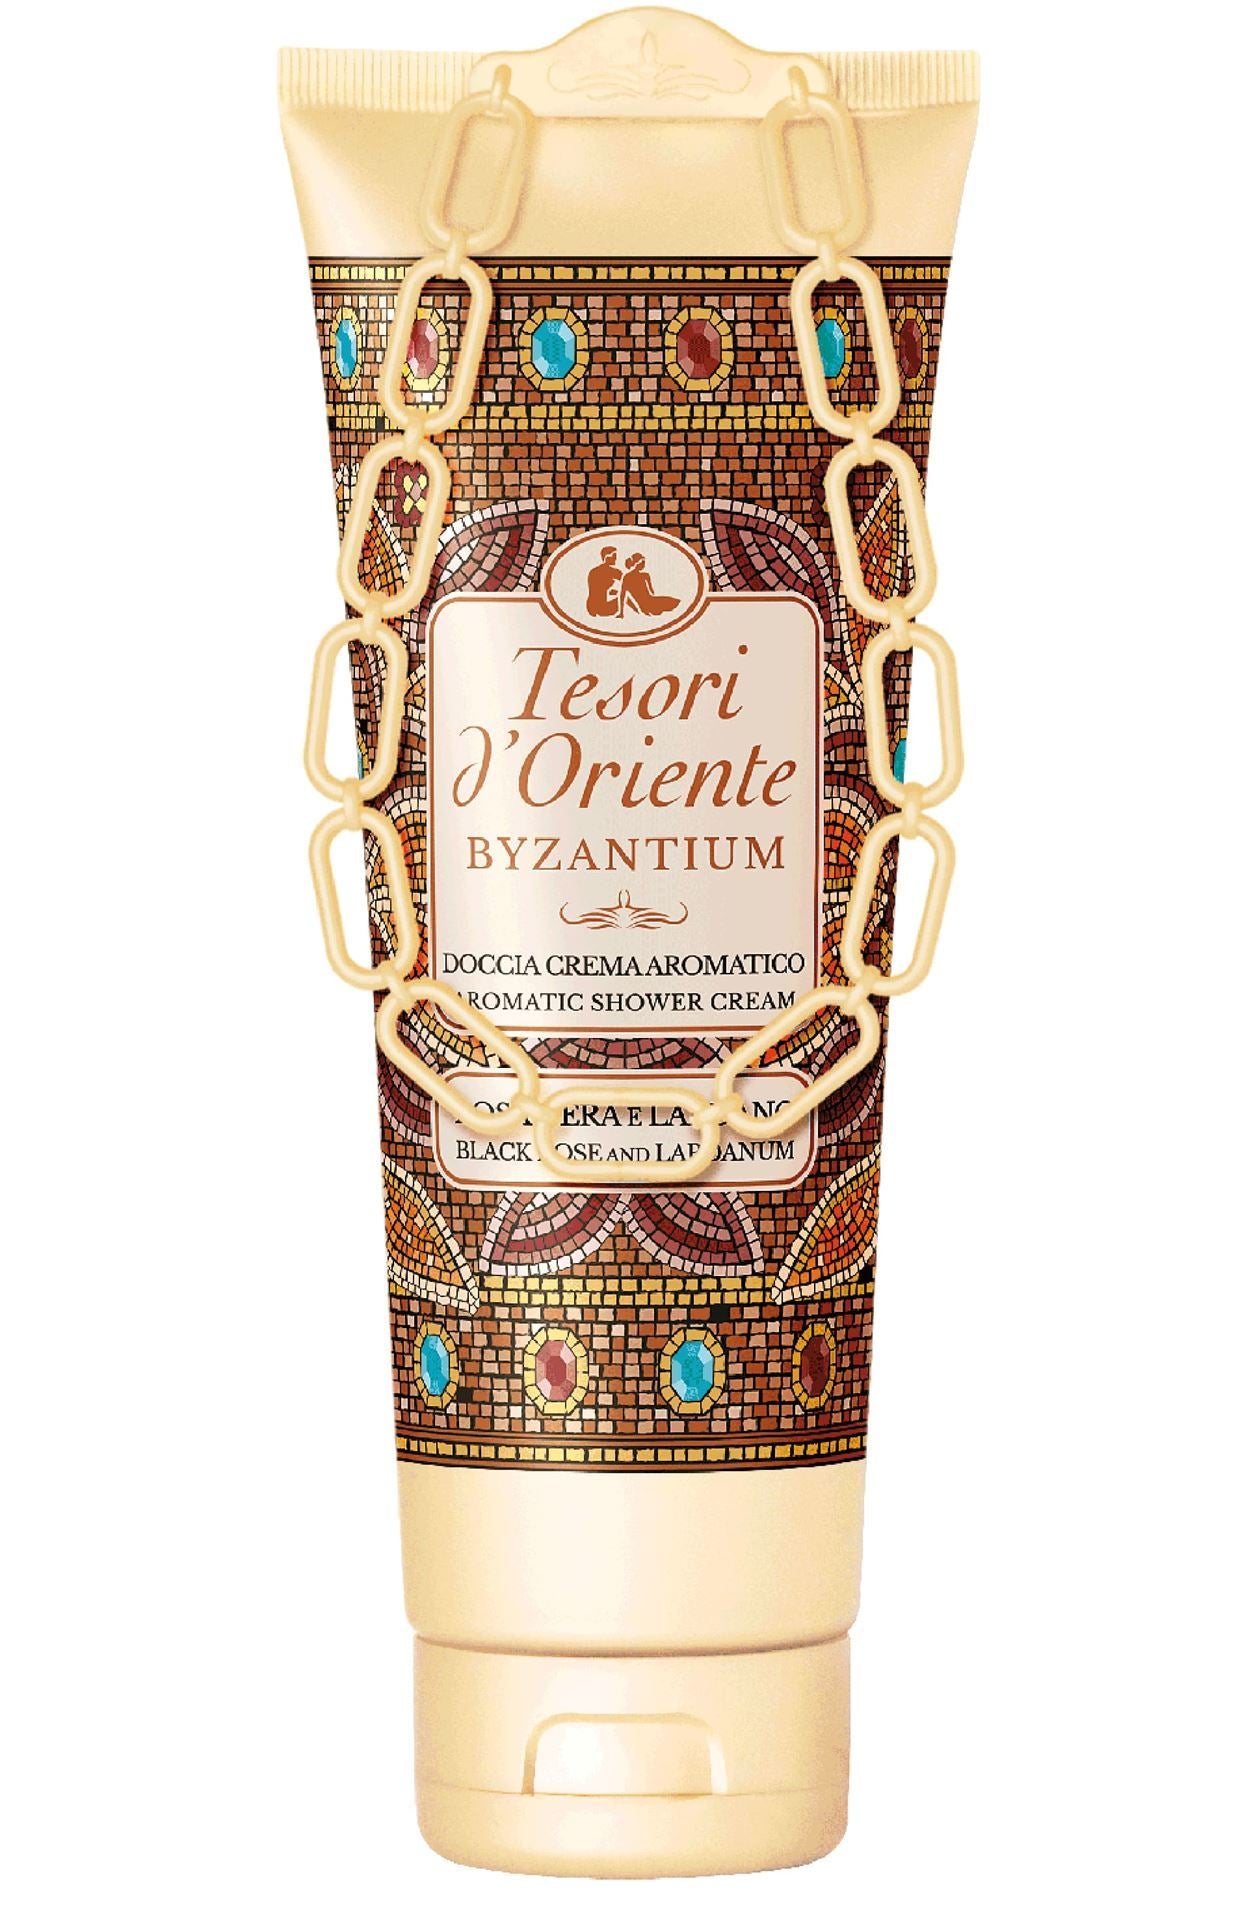 Buy TESORI D'ORIENTE, Tesori D'oriente Lotus Flower And Shea Butter Bath  Cream 500ml with Special Promotions